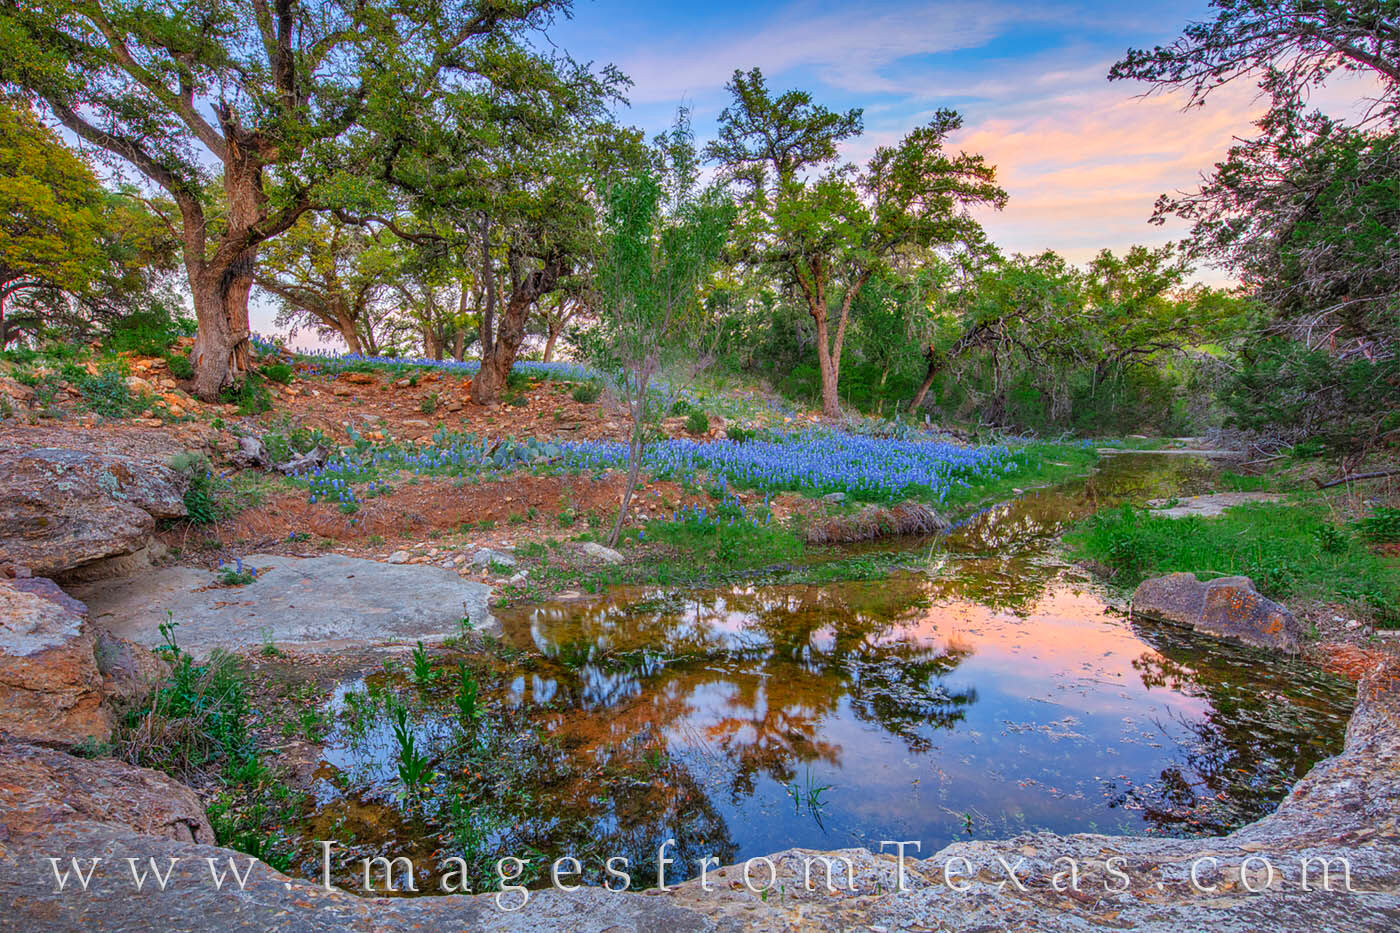 A ways down a dirt road, this little gem of bluebonnets is not often seen by most folks while wildflower hunting in the Texas hill country. 